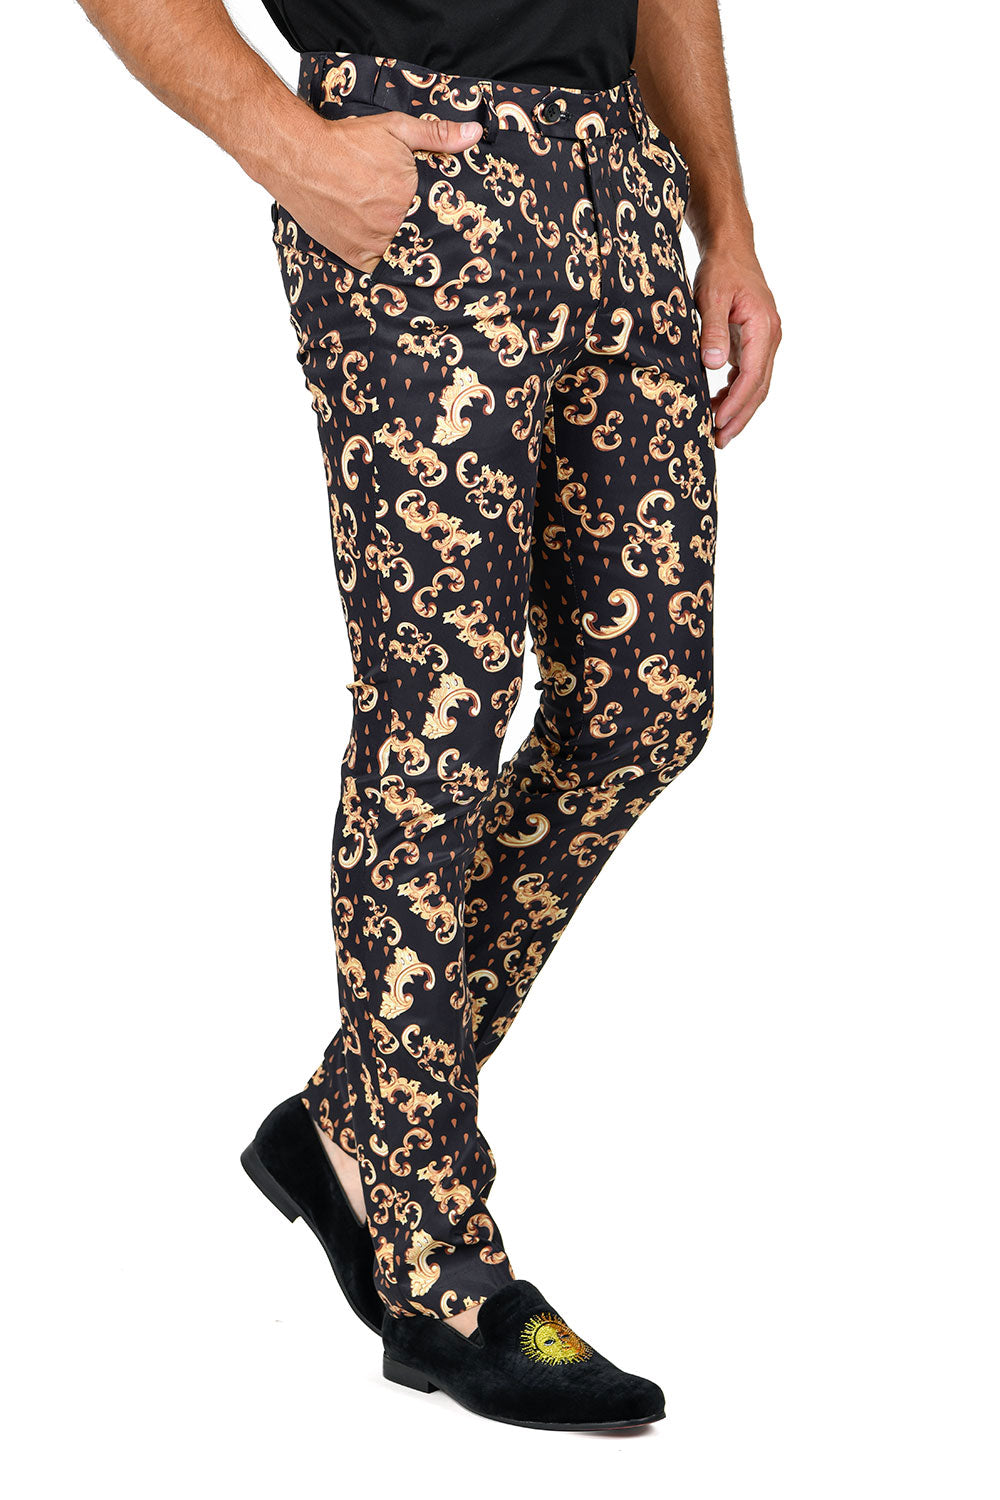 BARABAS Men's Classic Luxury Floral Chino Pants CP112 